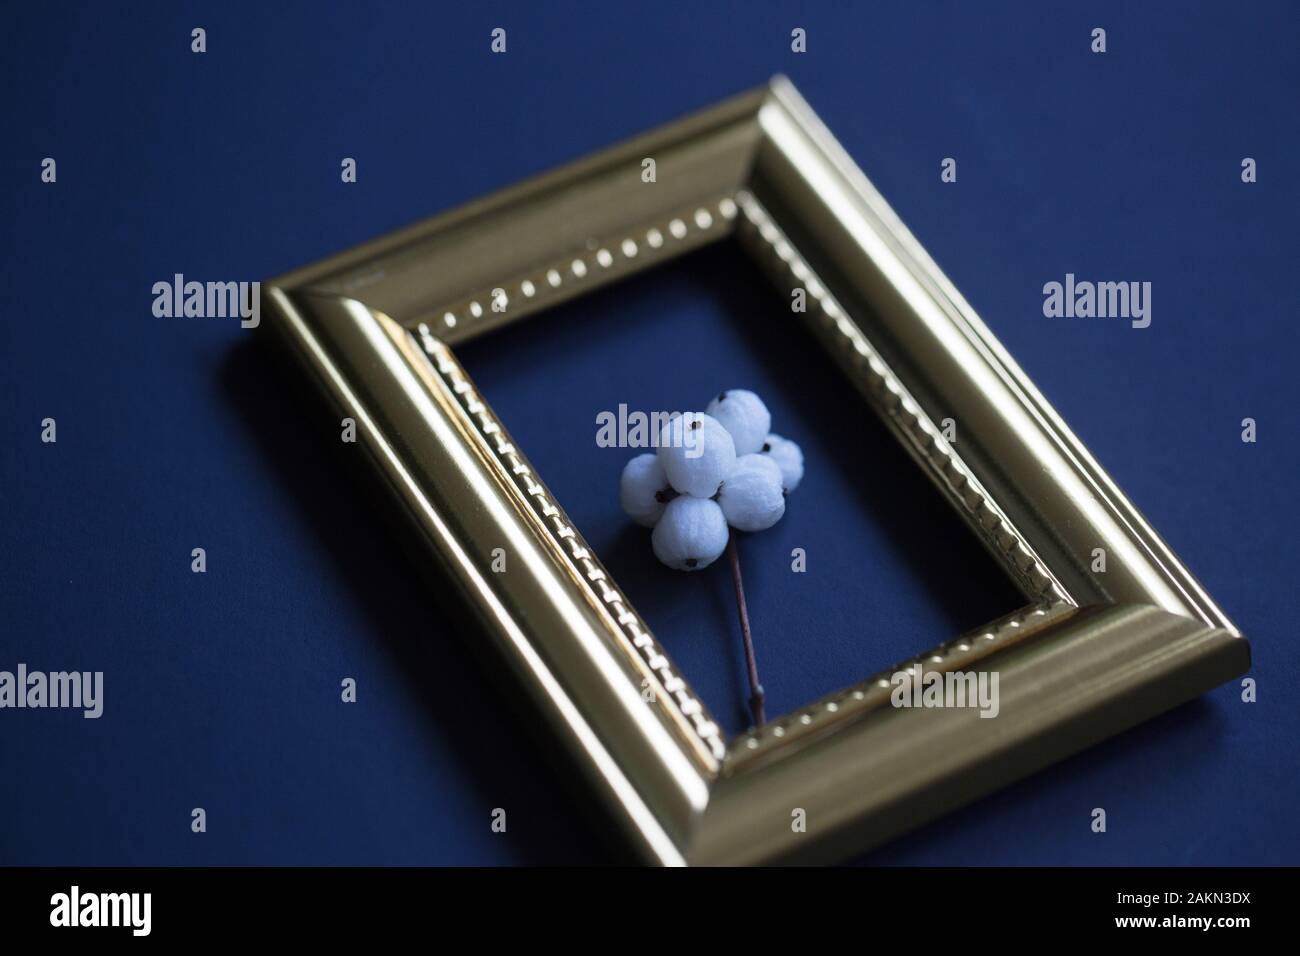 A sprig of real snowberries in a gold picture frame. Stock Photo